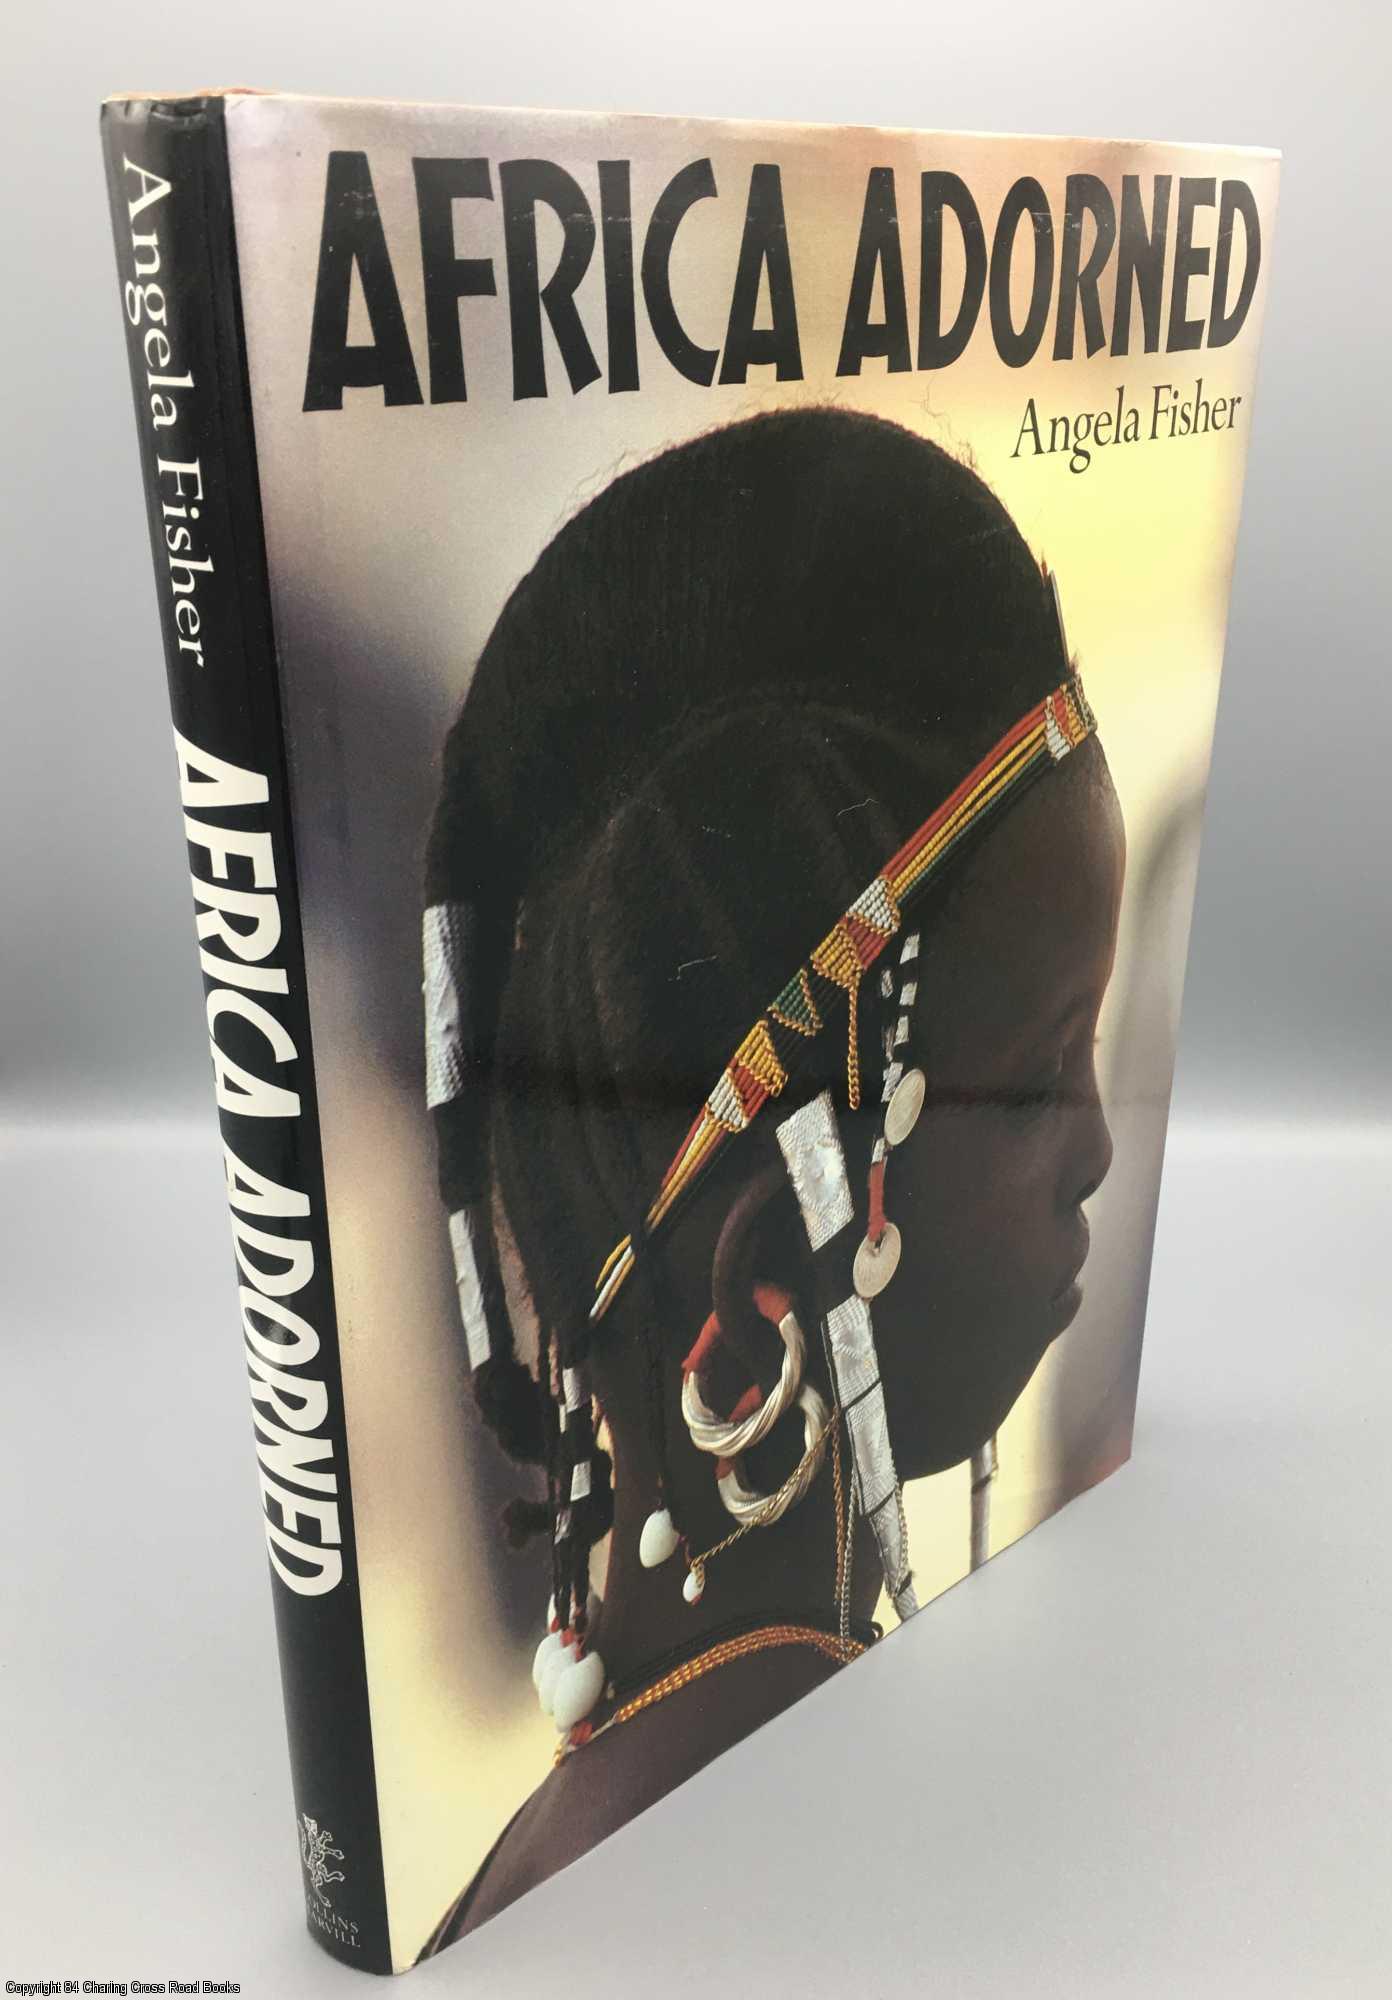 Africa Adorned by Angela Fisher on 84 Charing Cross Rare Books